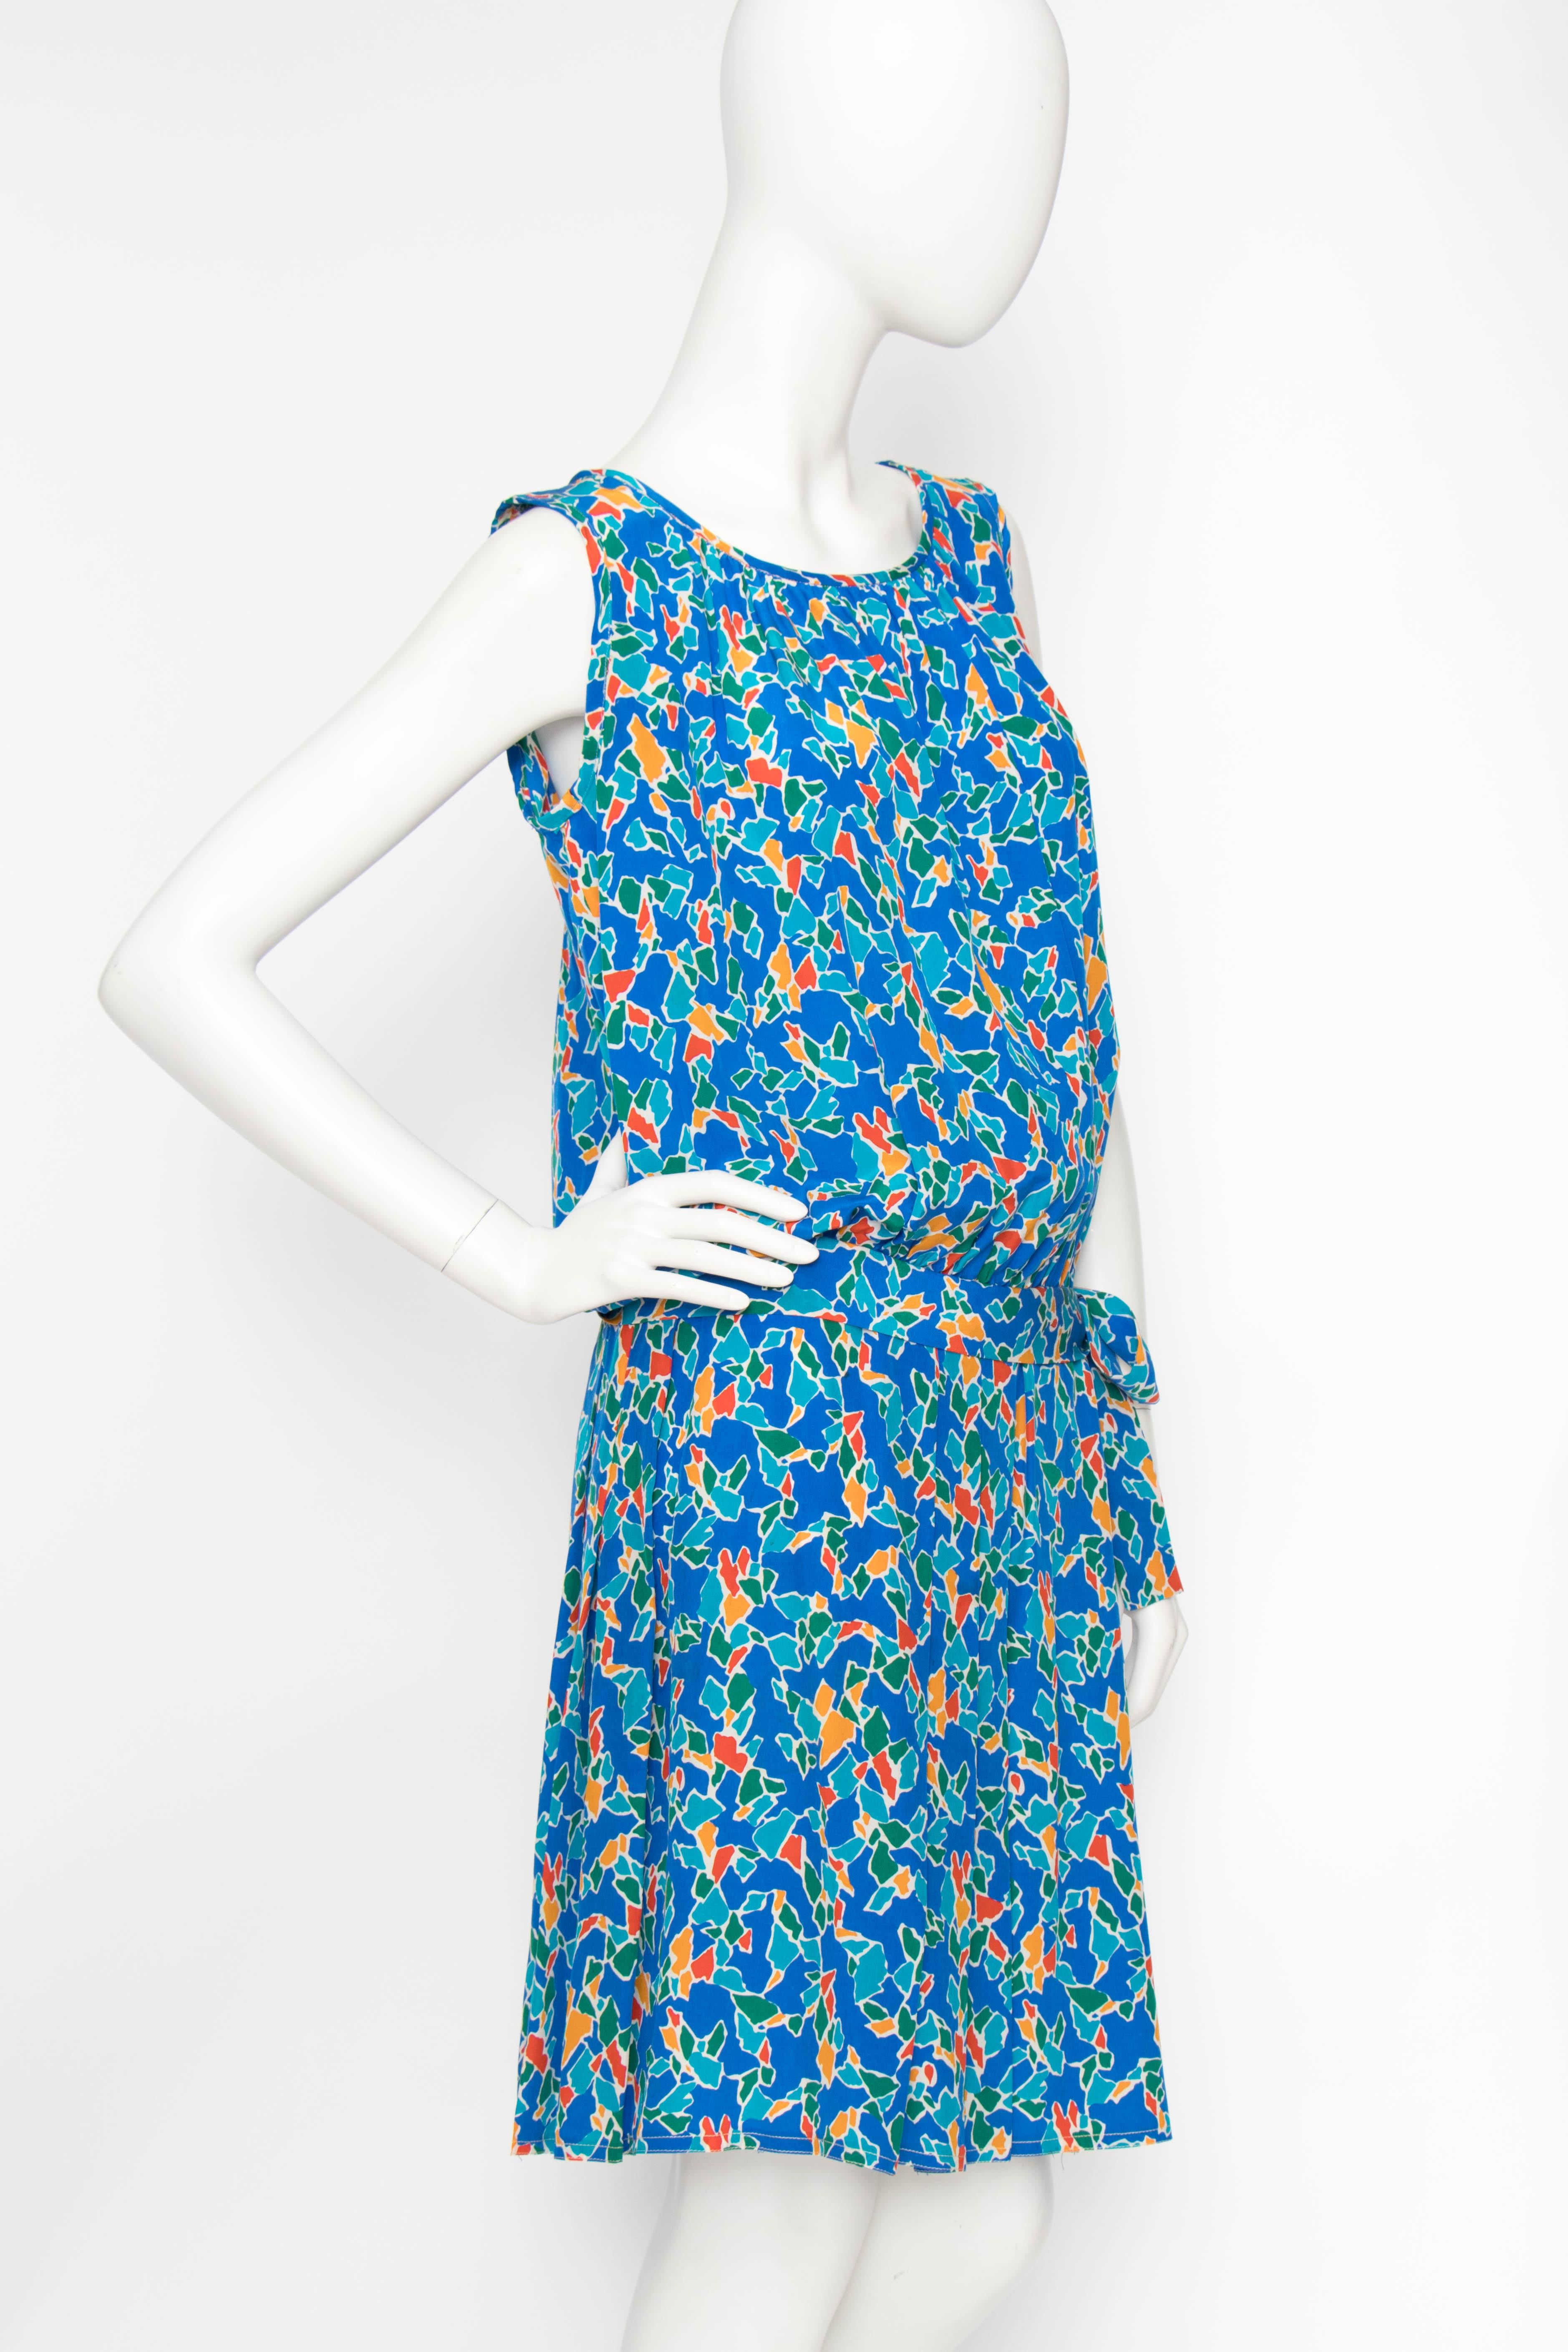 A 1980s Yves Saint Laurent Rive Gauche silk dress with a round neckline, pleated skirt and drop waist with bow detail. The sleeveless dress is clad in a fun graphic print in bold green, red, yellow and blue with white accents. 

The size of the